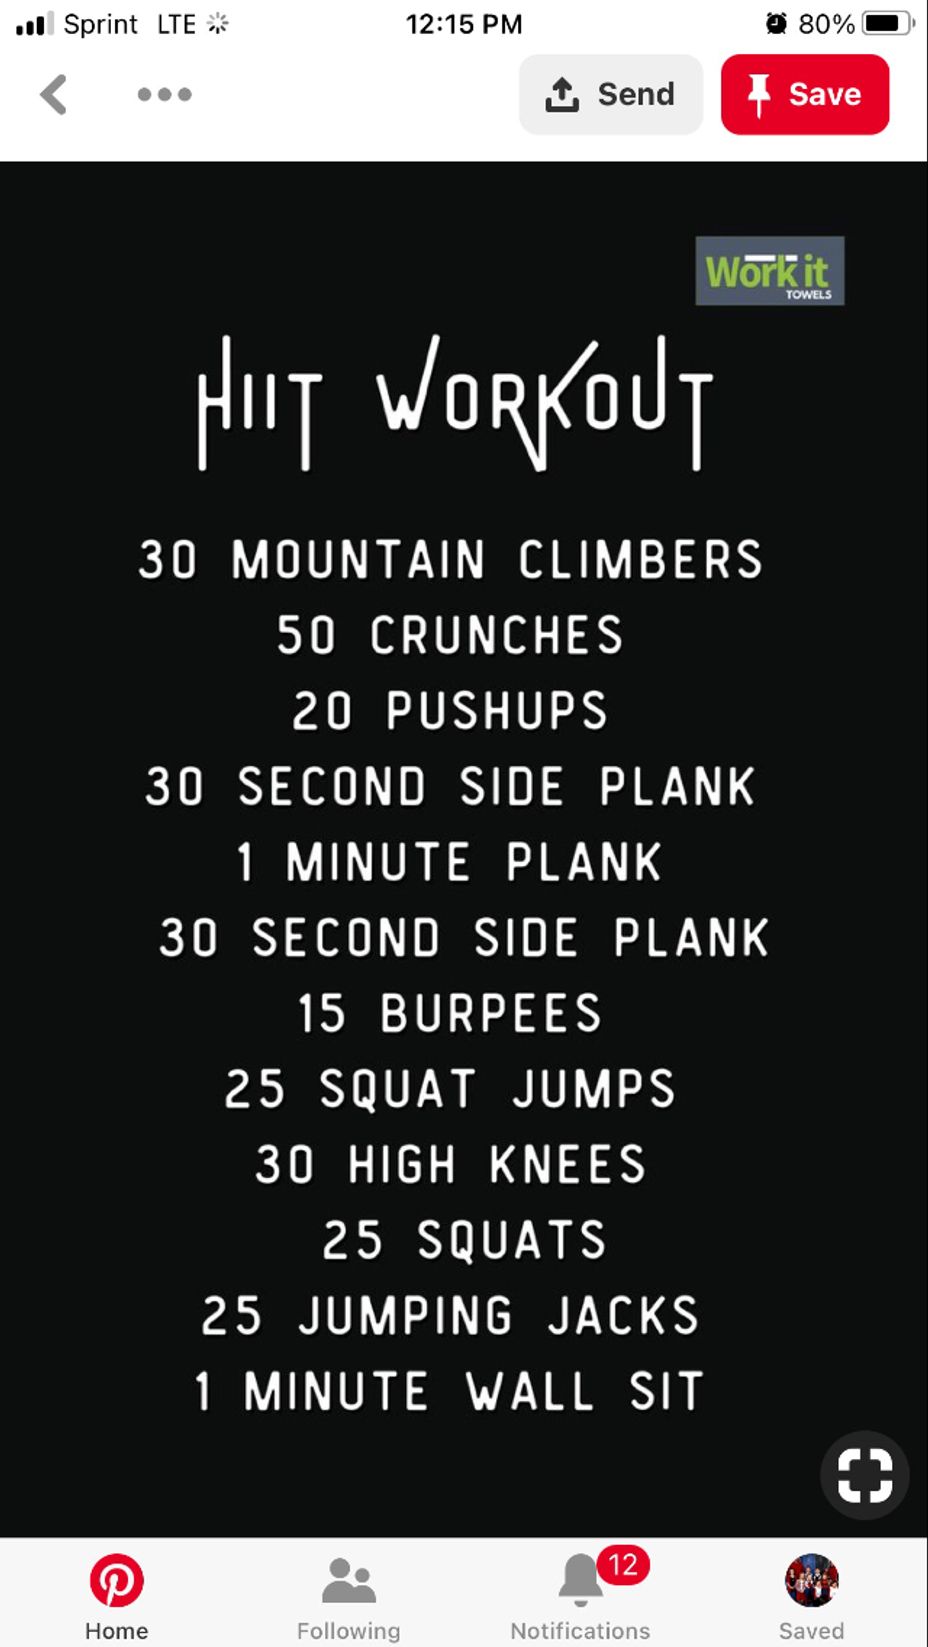 <p>This is one of my favorite workouts I would love for you to try your self and let me know what you think<br></p>